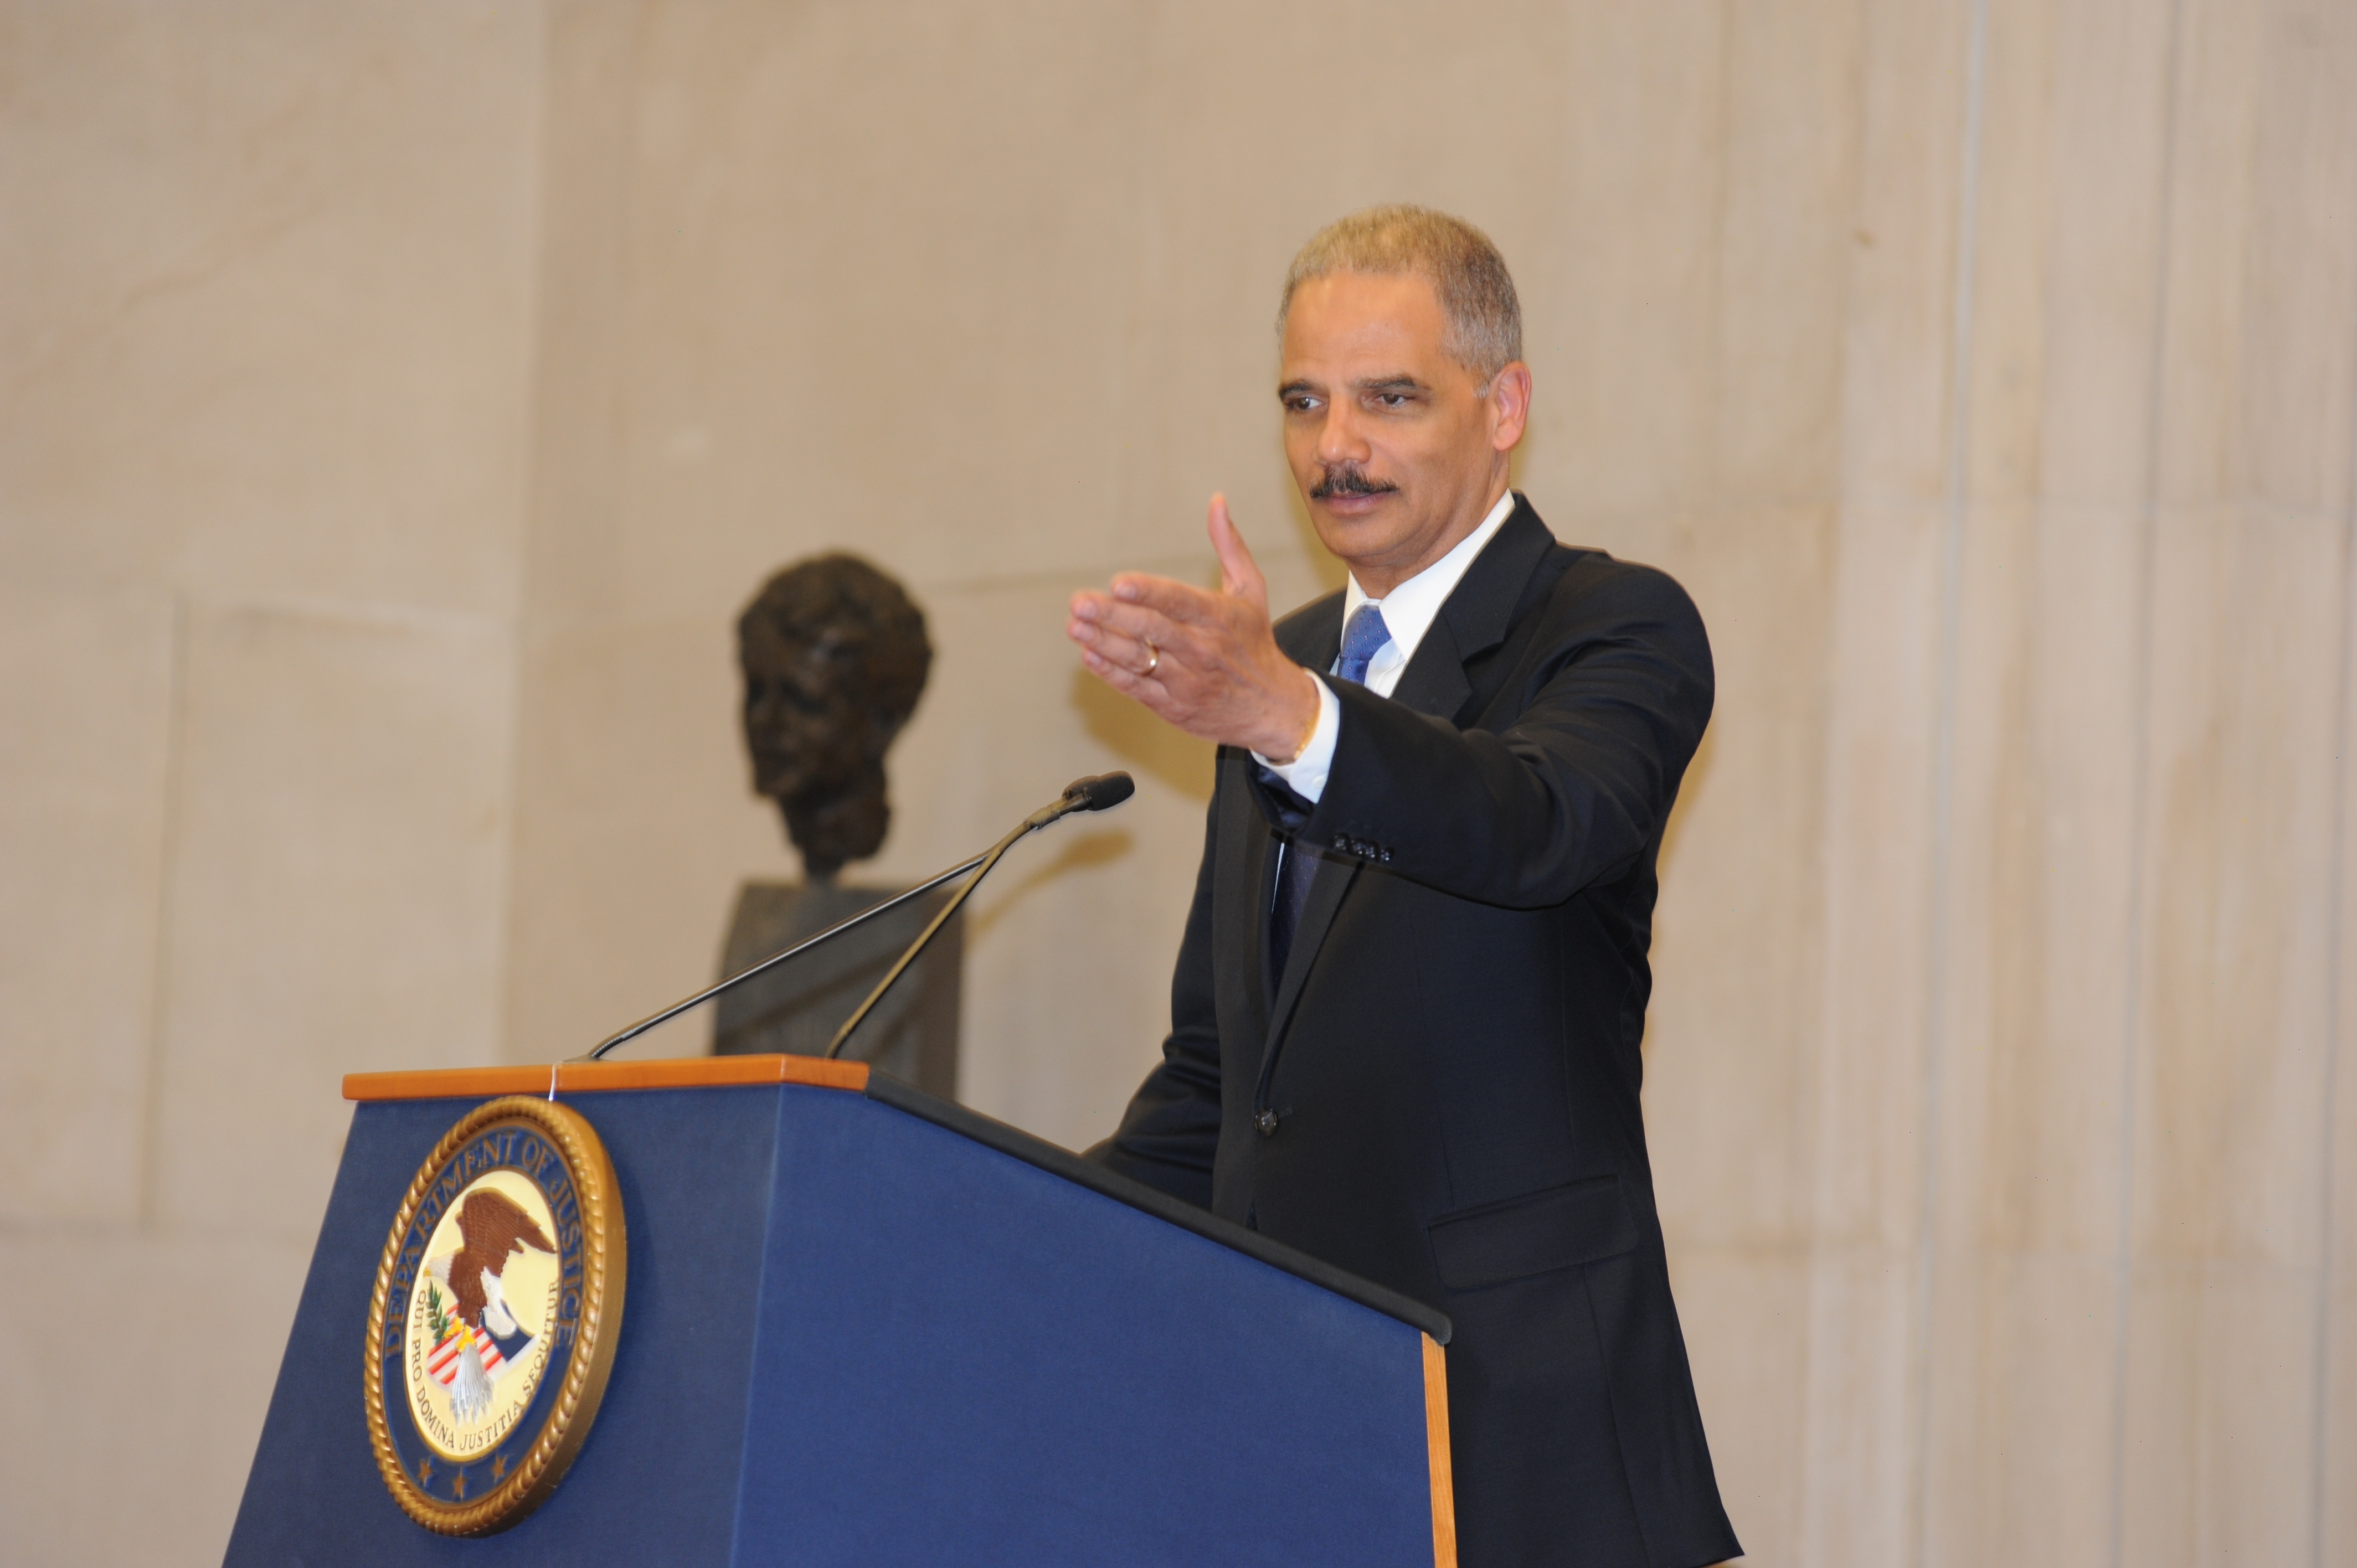 Attorney General Eric Holder discusses the many accomplishments of 2012 Sherman Award recipient James F. Rill.